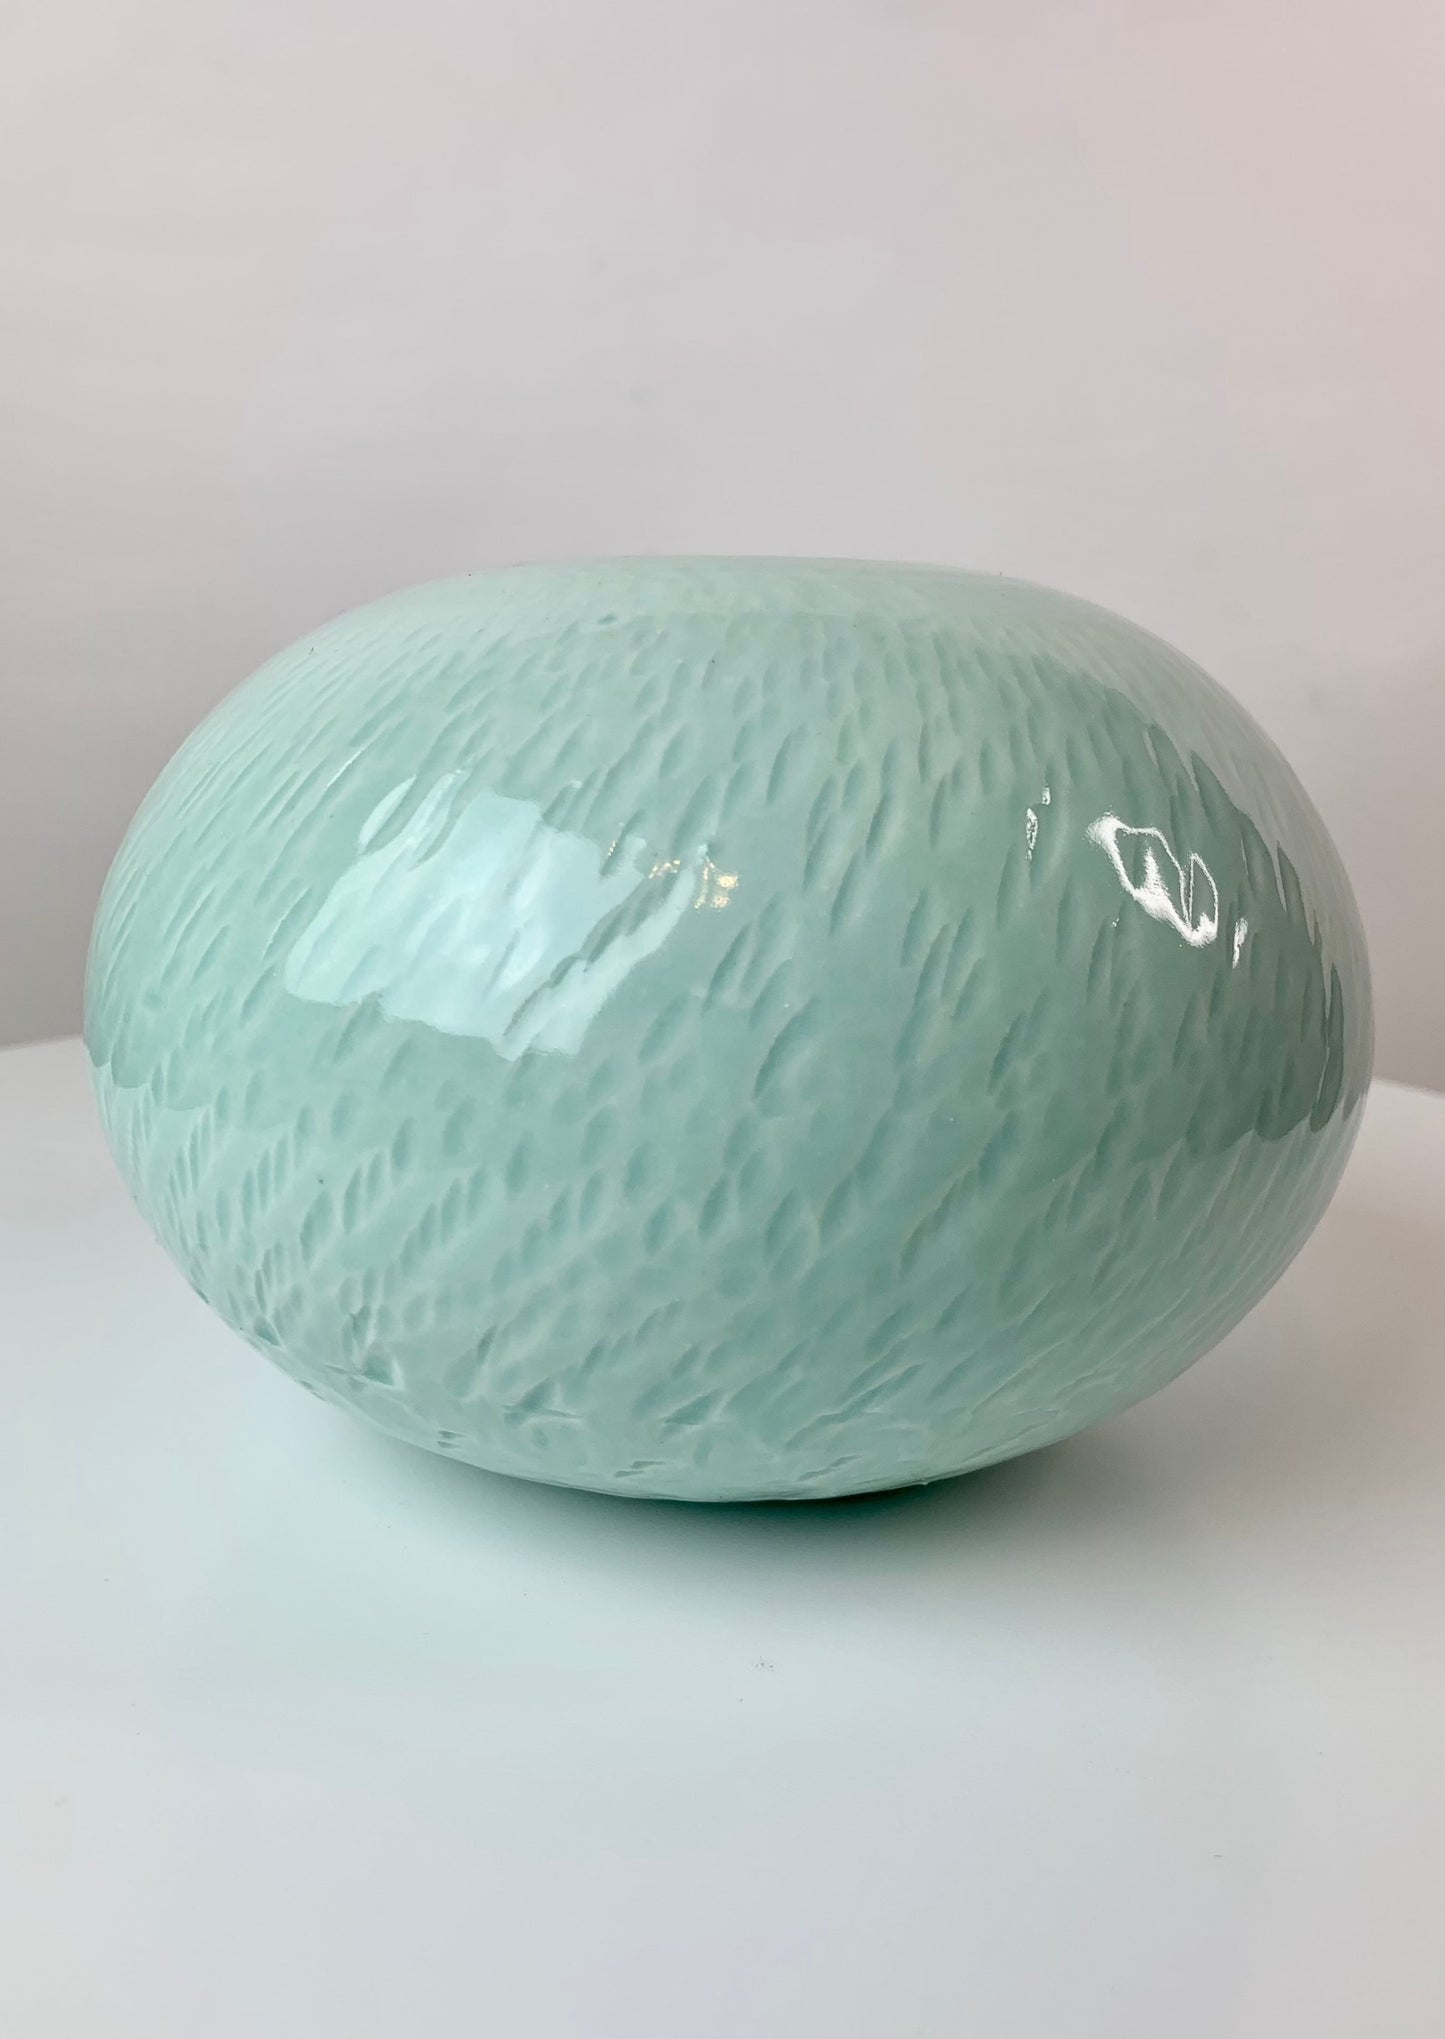 Bulbous round porcelain vase with texture in turquoise